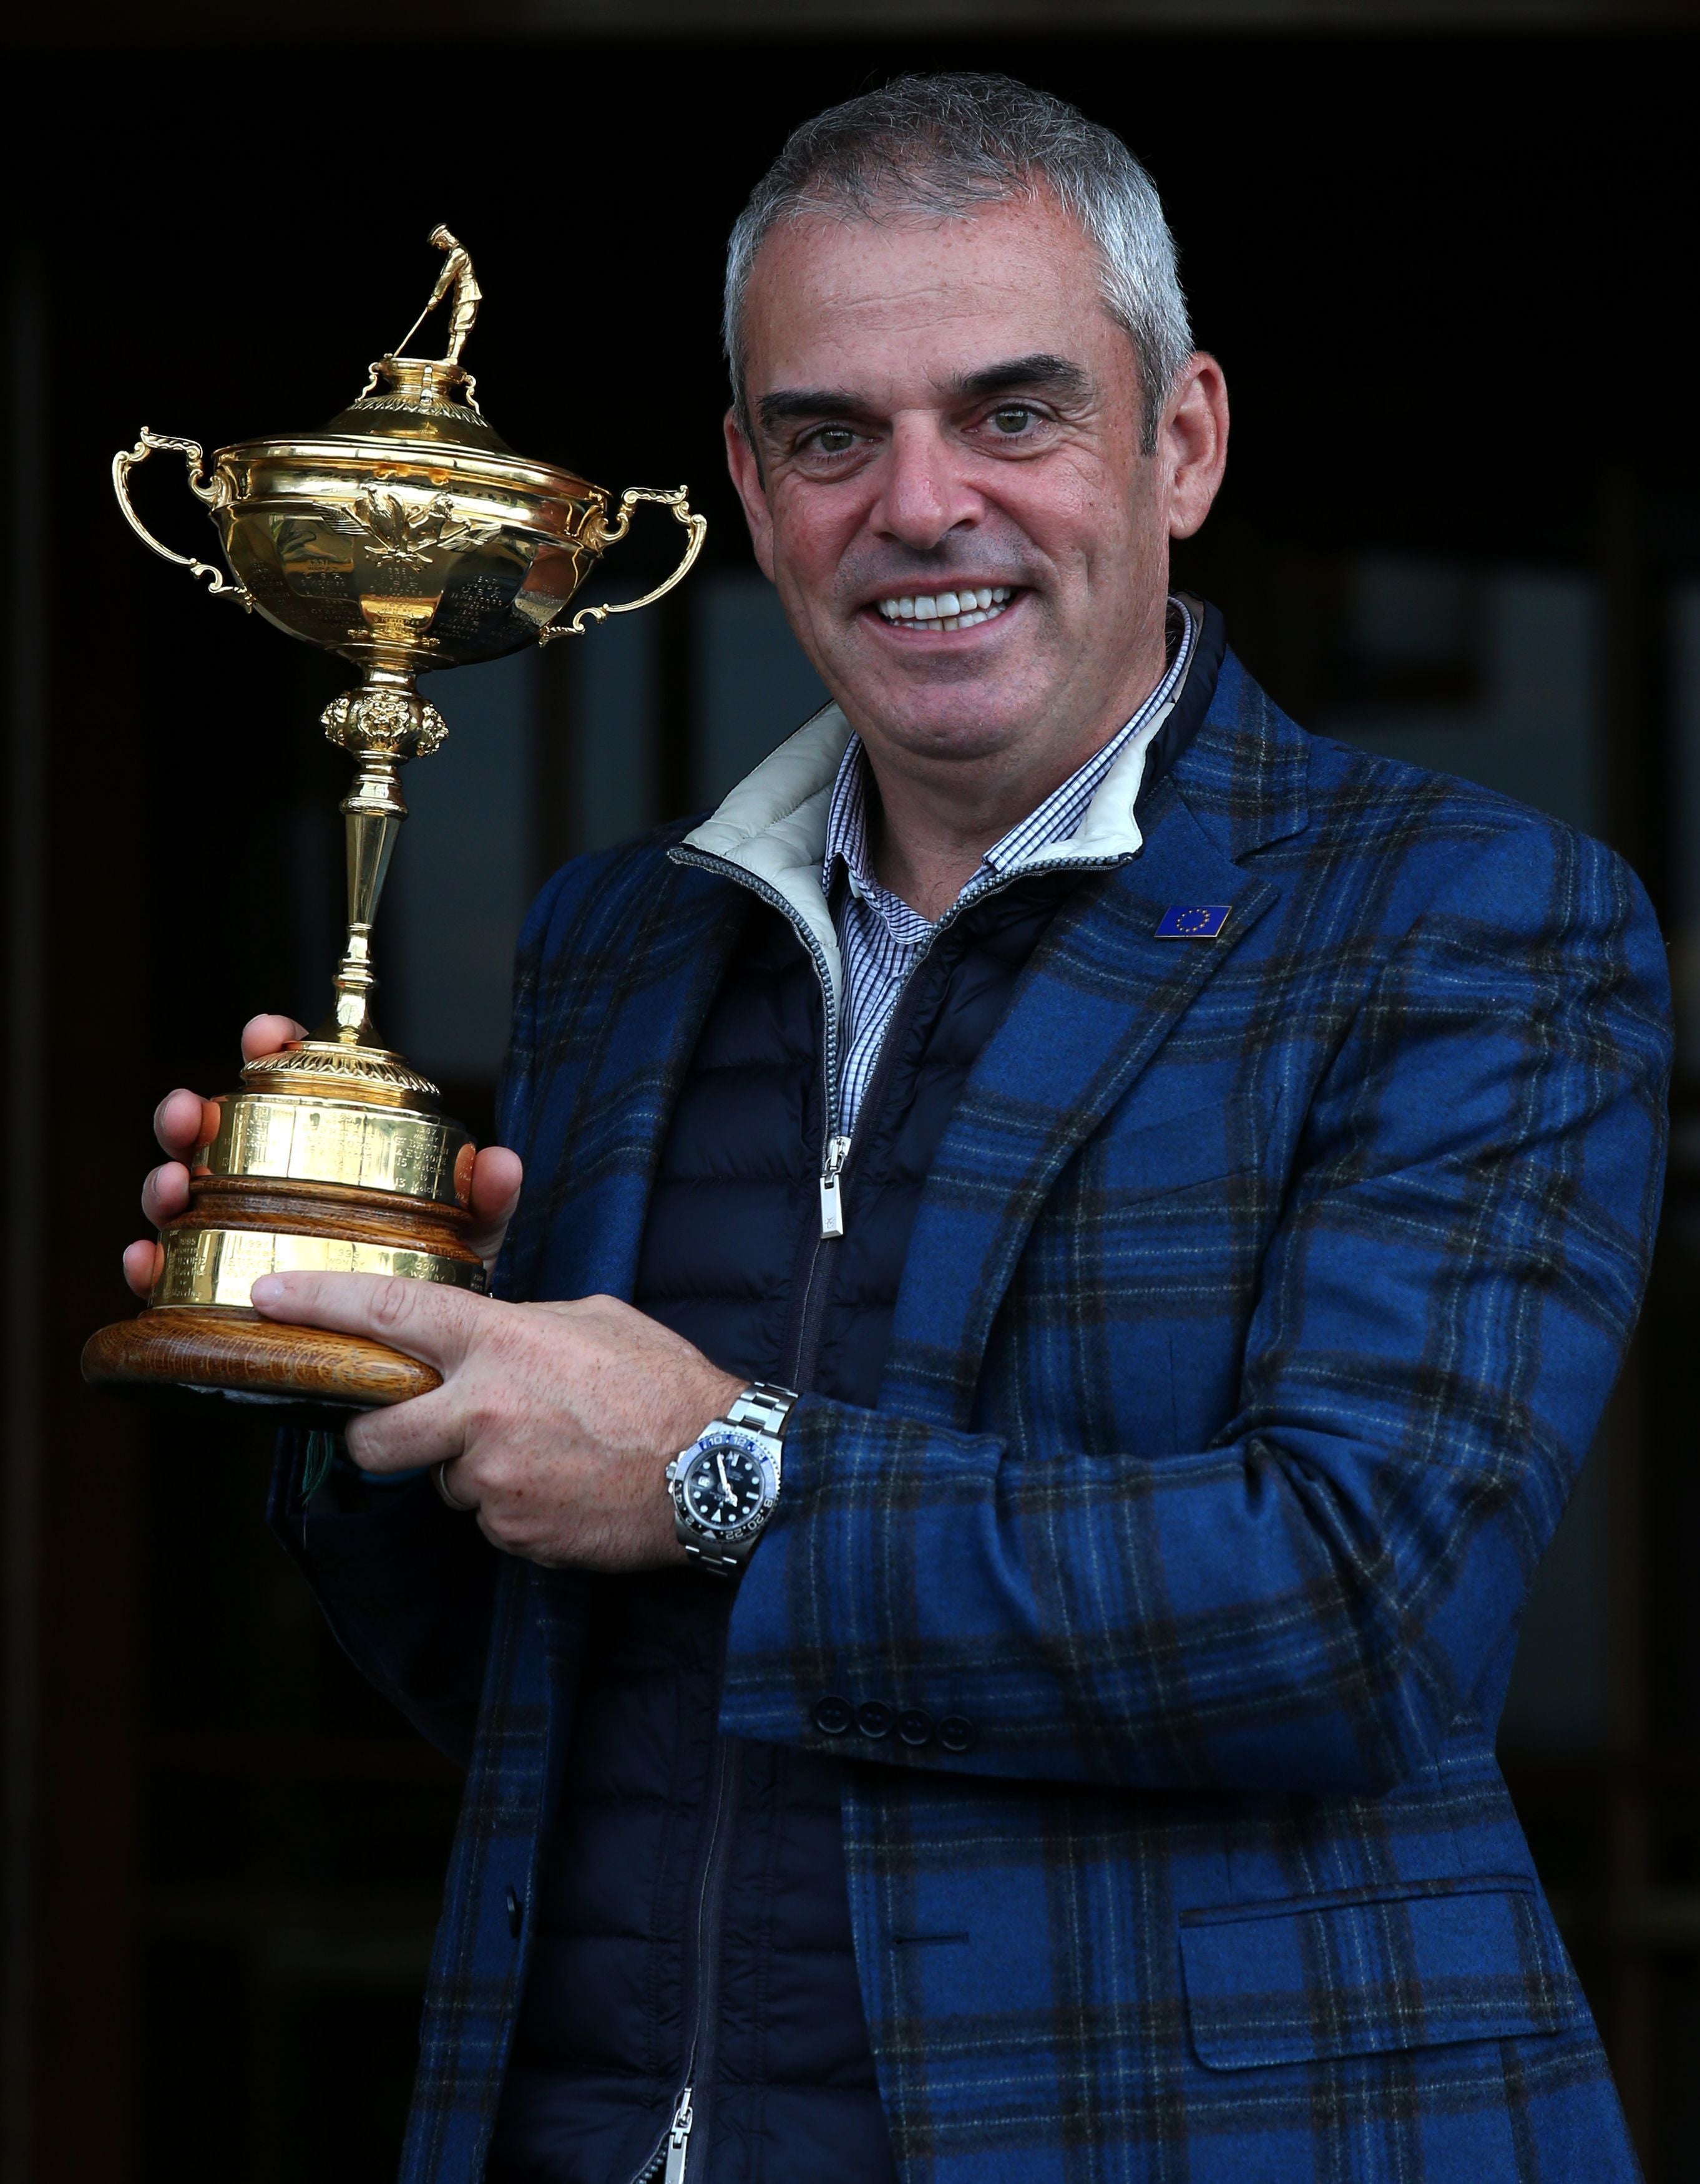 Paul McGinley captained Europe to Ryder Cup success in 2014 (Andrew Milligan/PA)